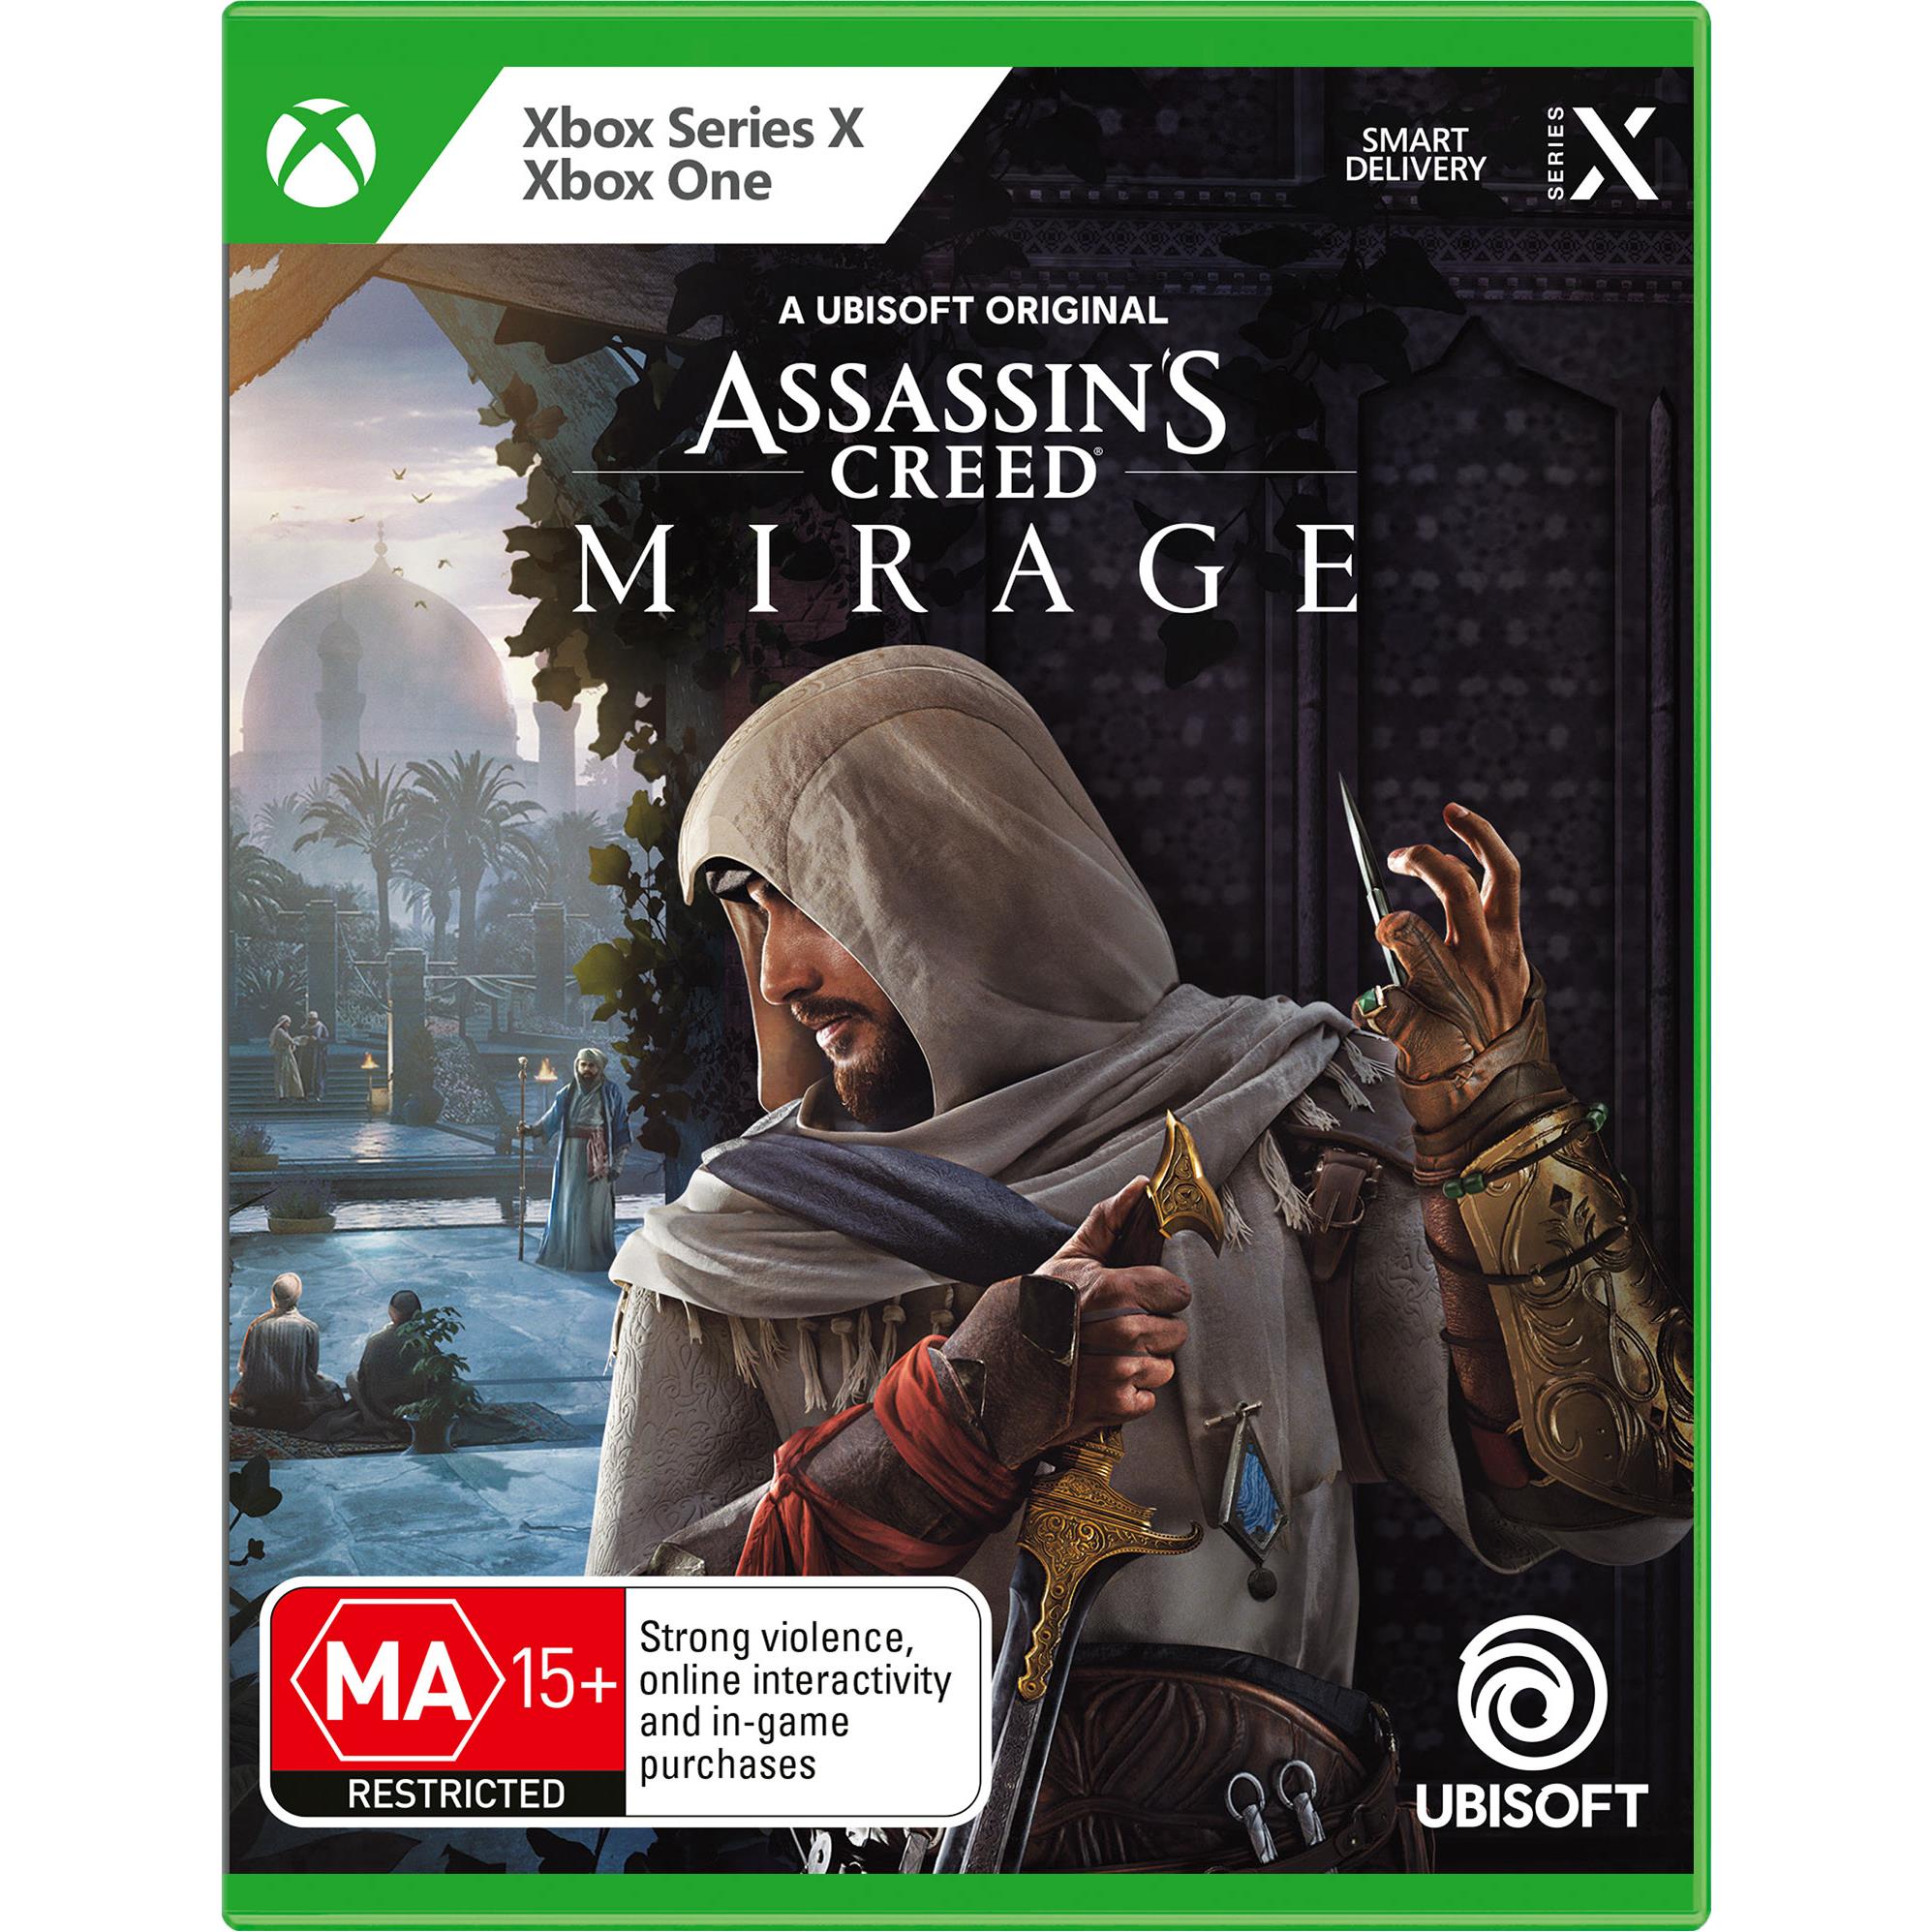 Buy Assassin's Creed Mirage PS5 Compare Prices